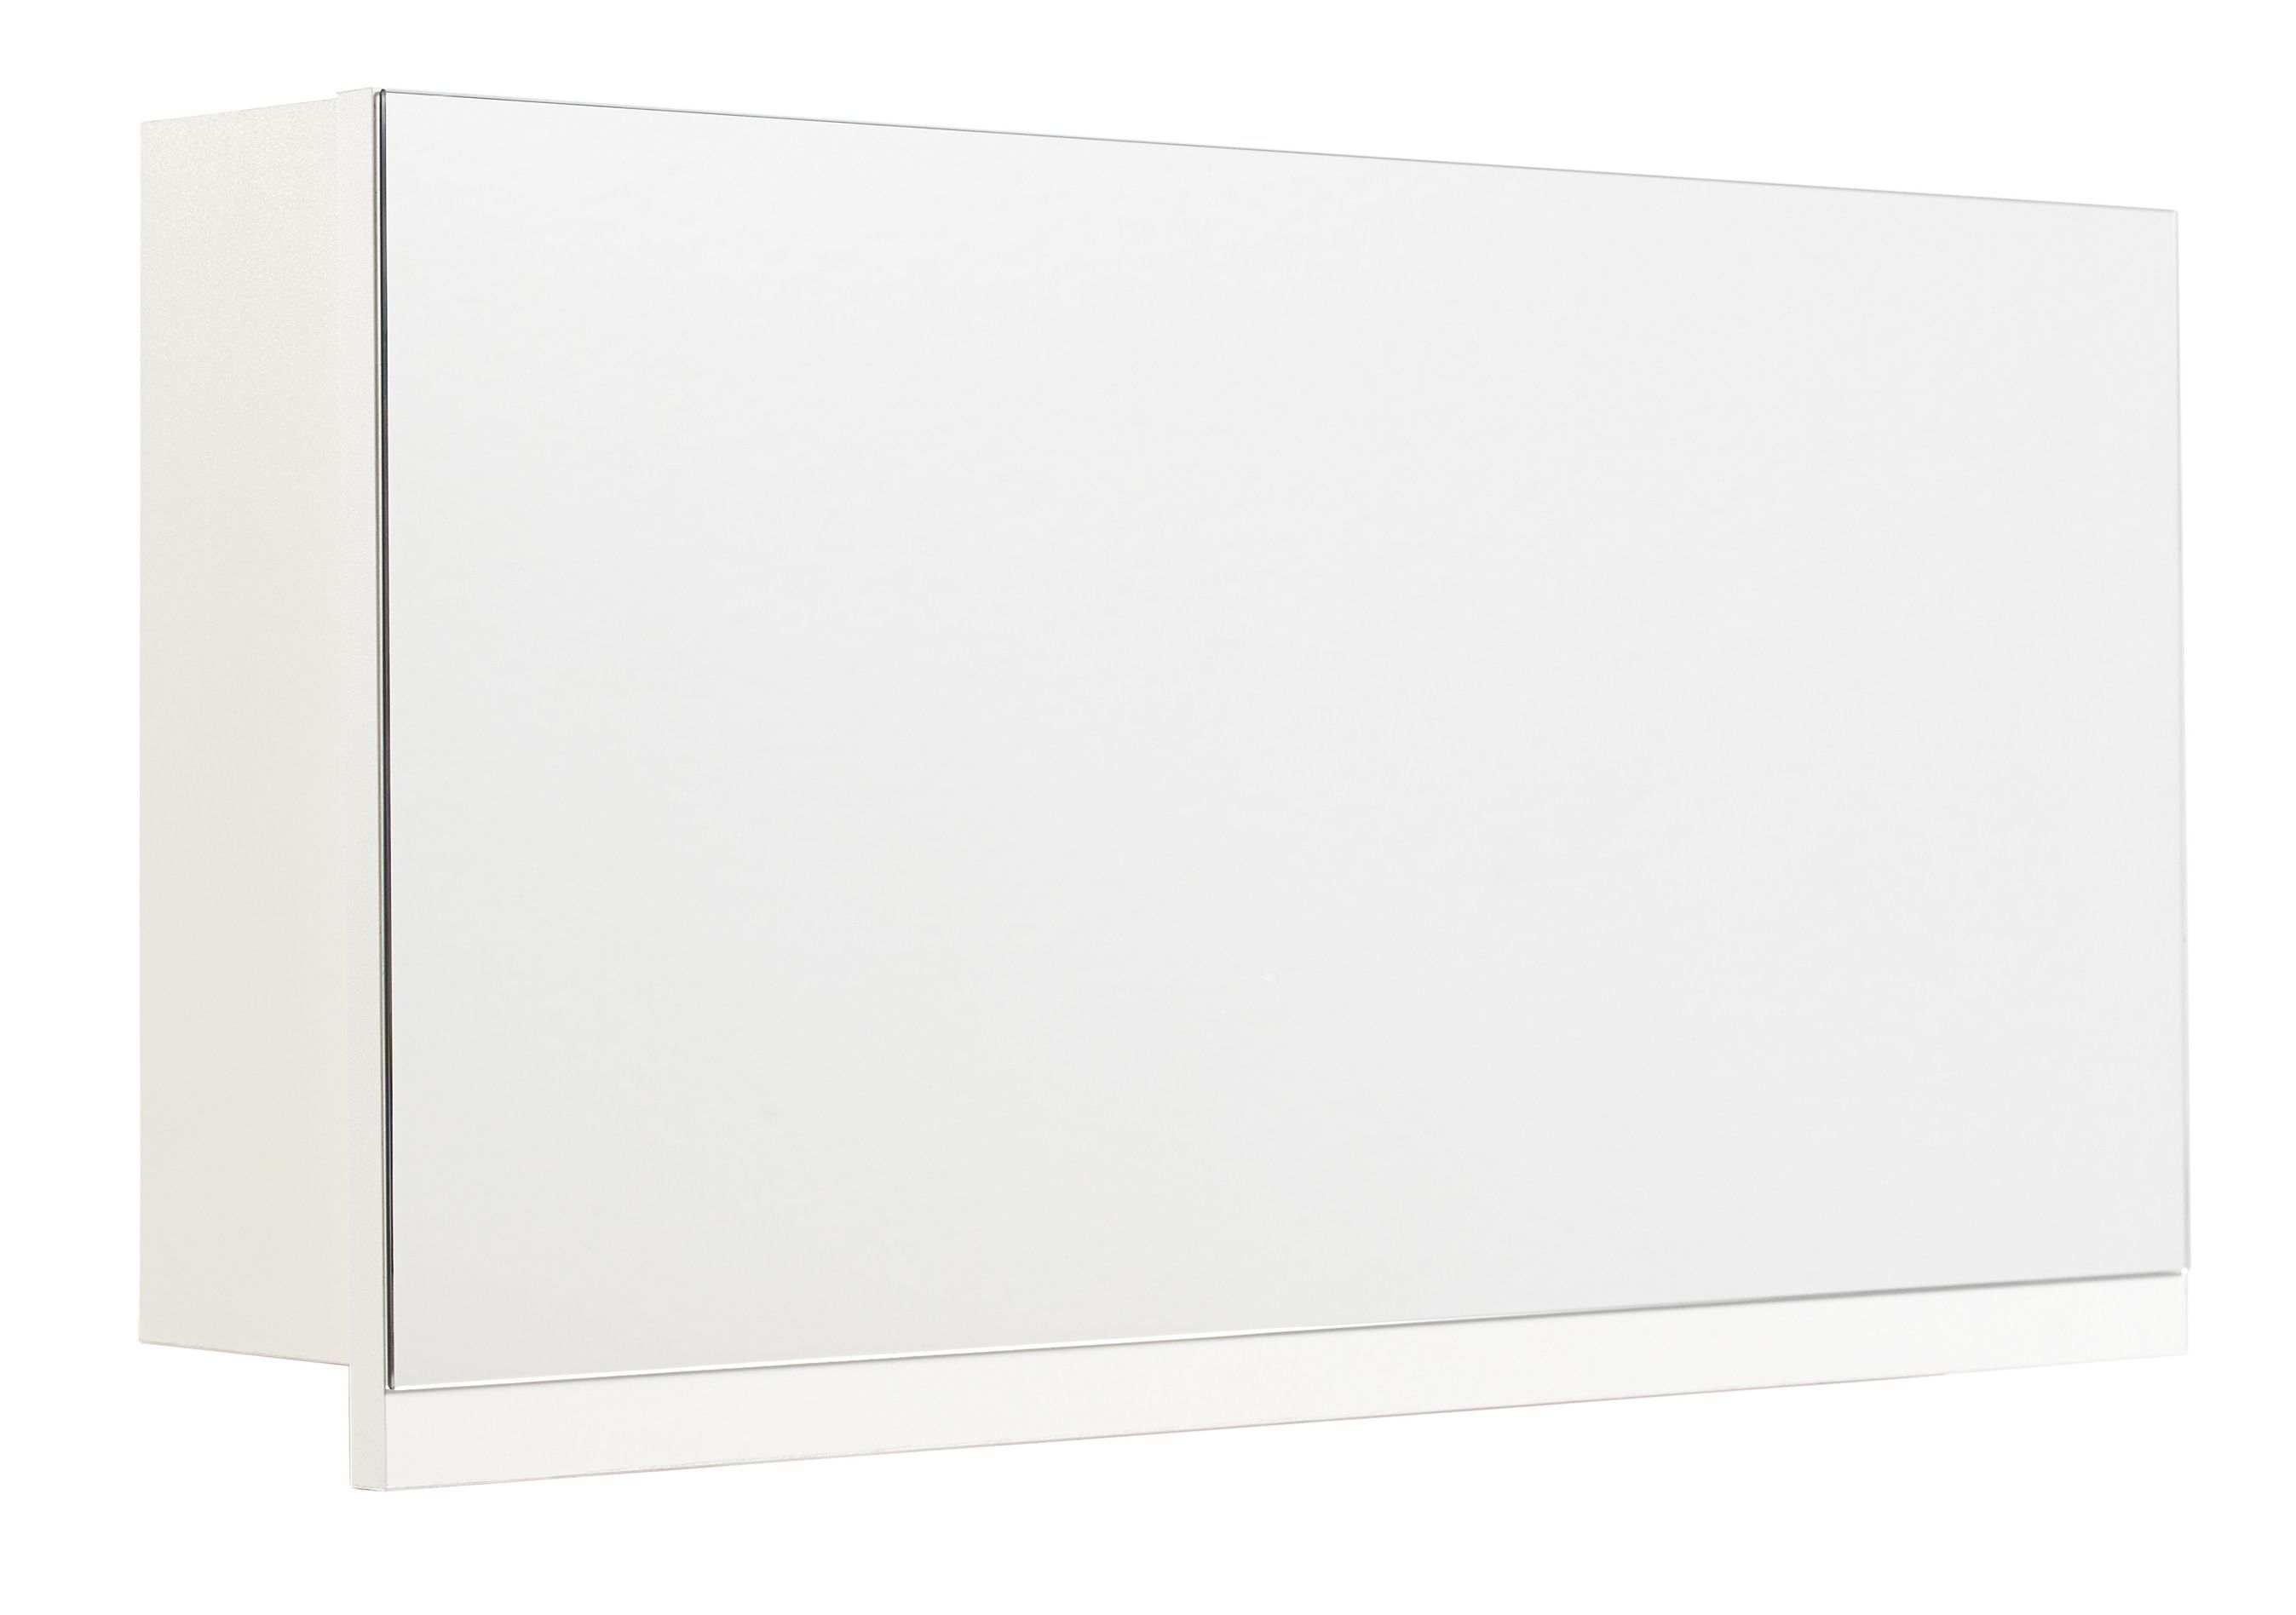 Cooke & Lewis Ardesio Gloss White Mirrored Cabinet (W)750mm (H)400mm